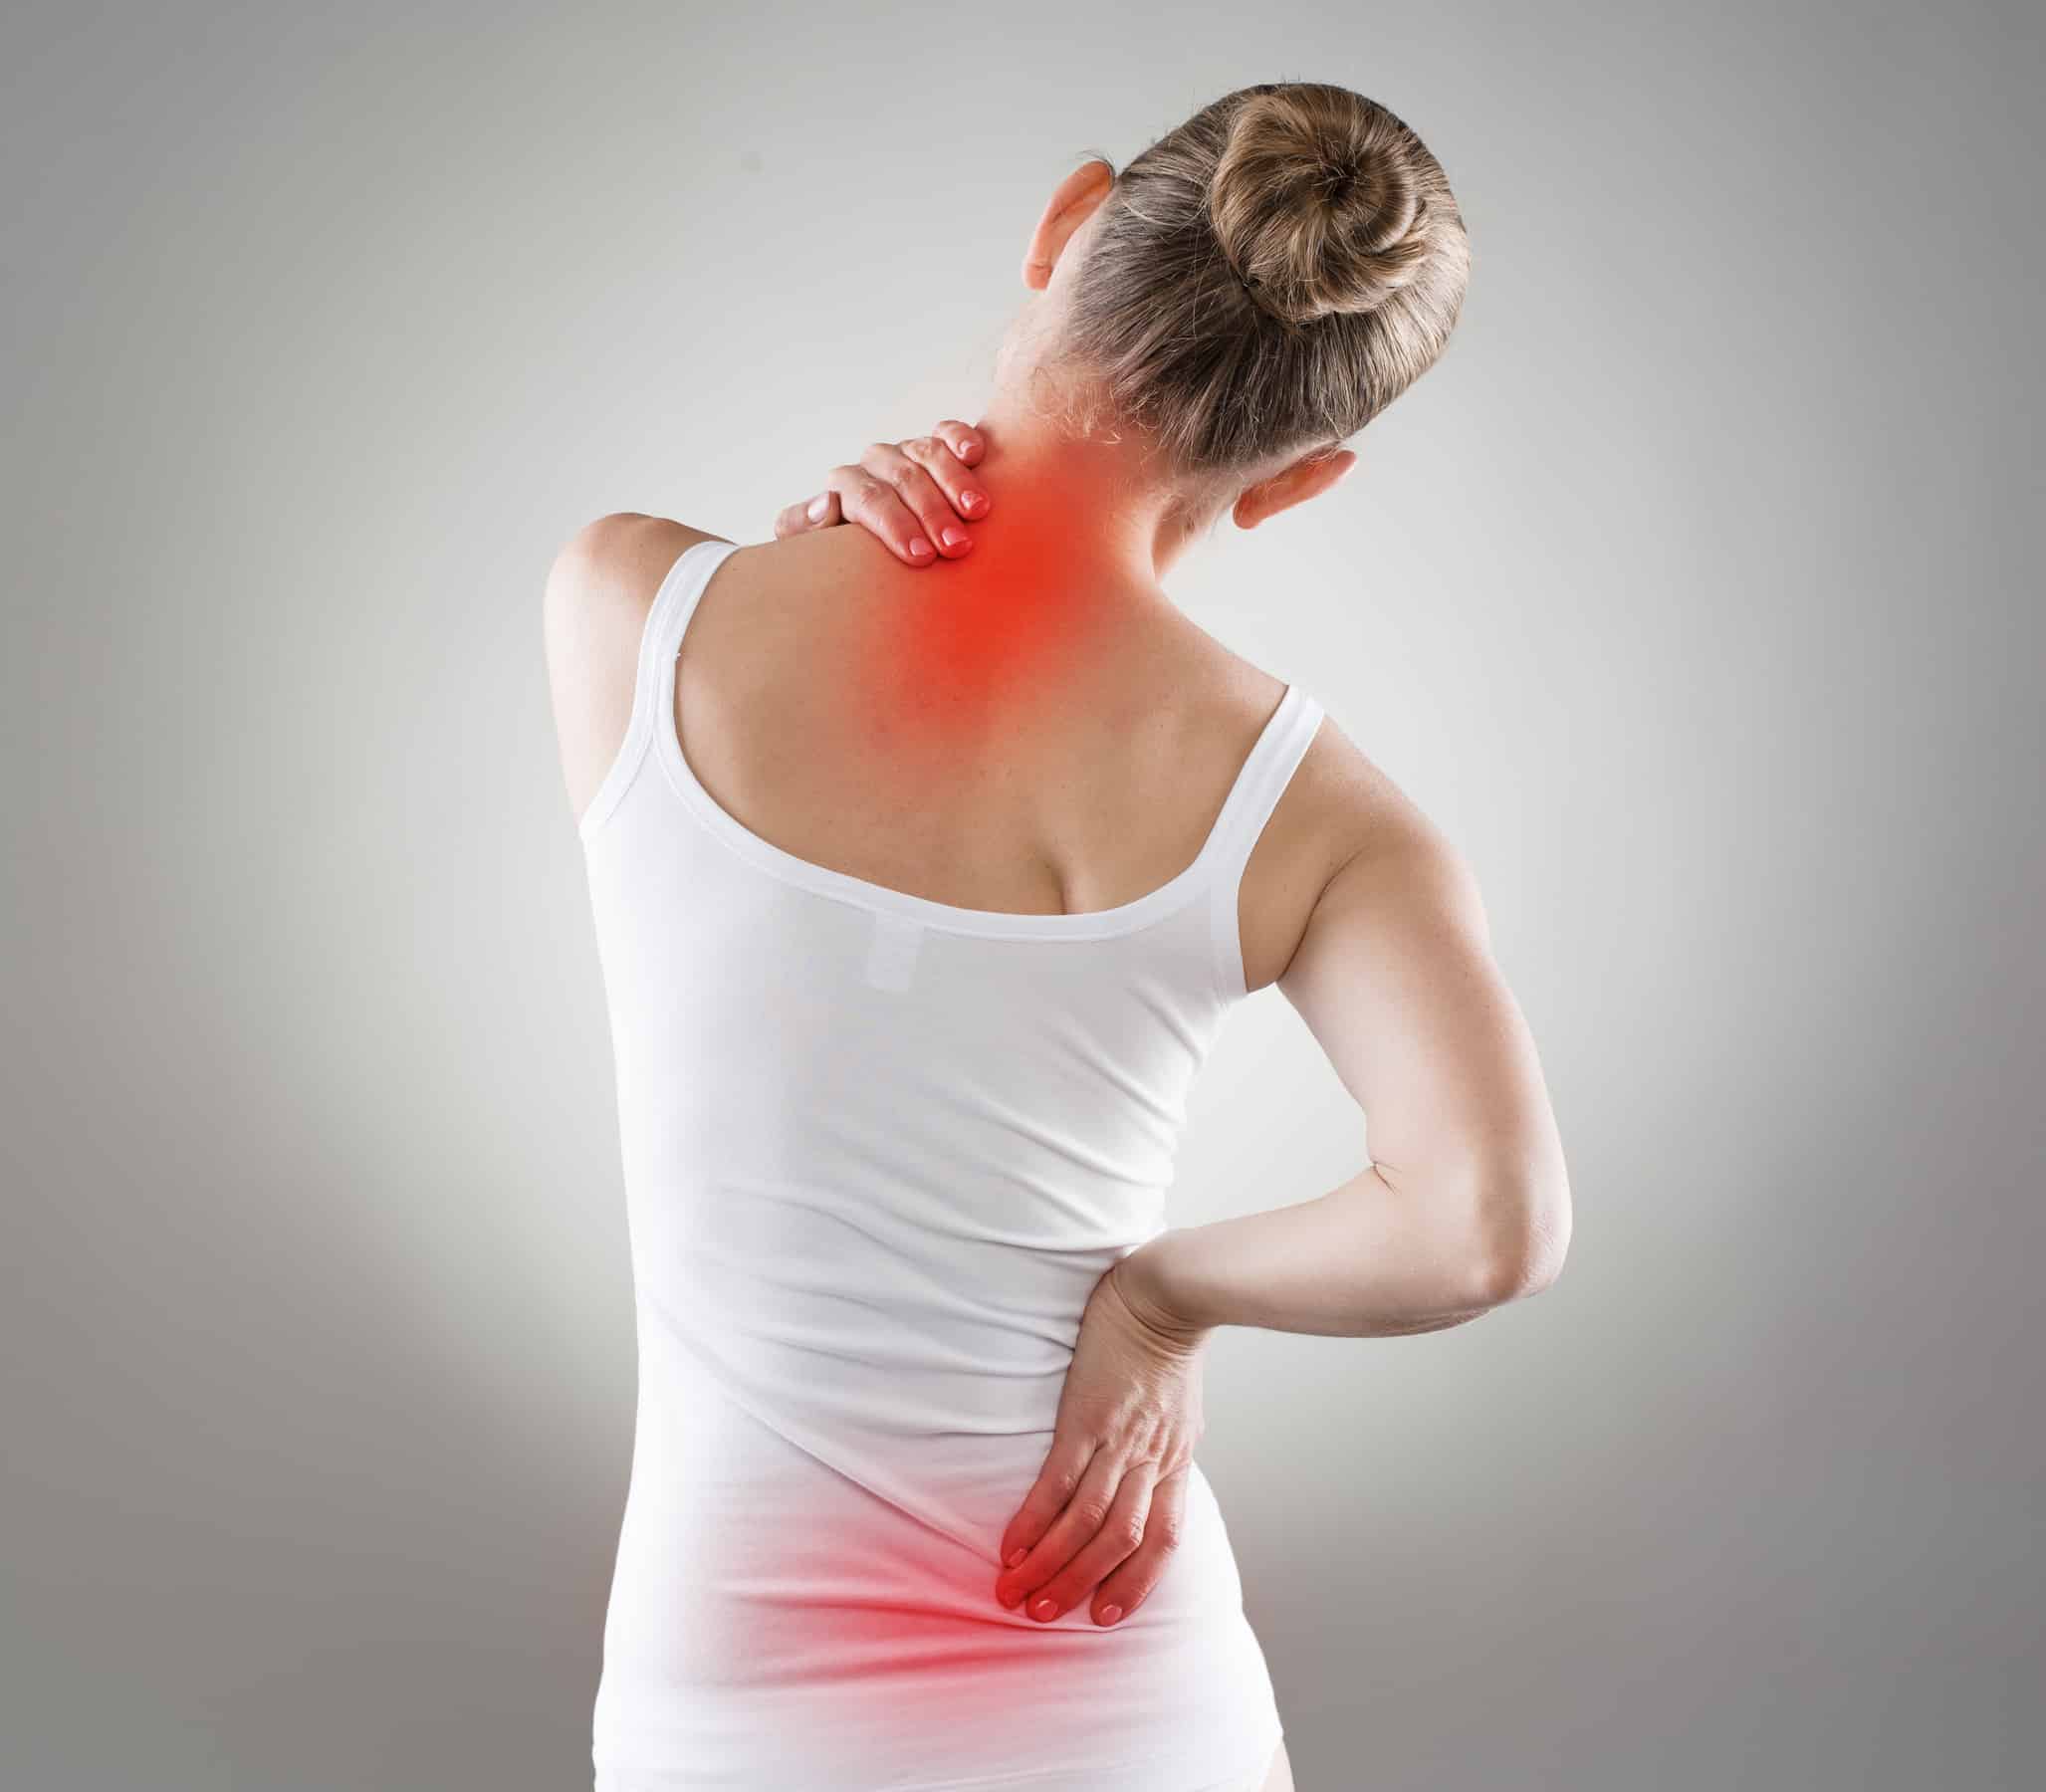 Spine osteoporosis. Spinal cord problems on woman’s back